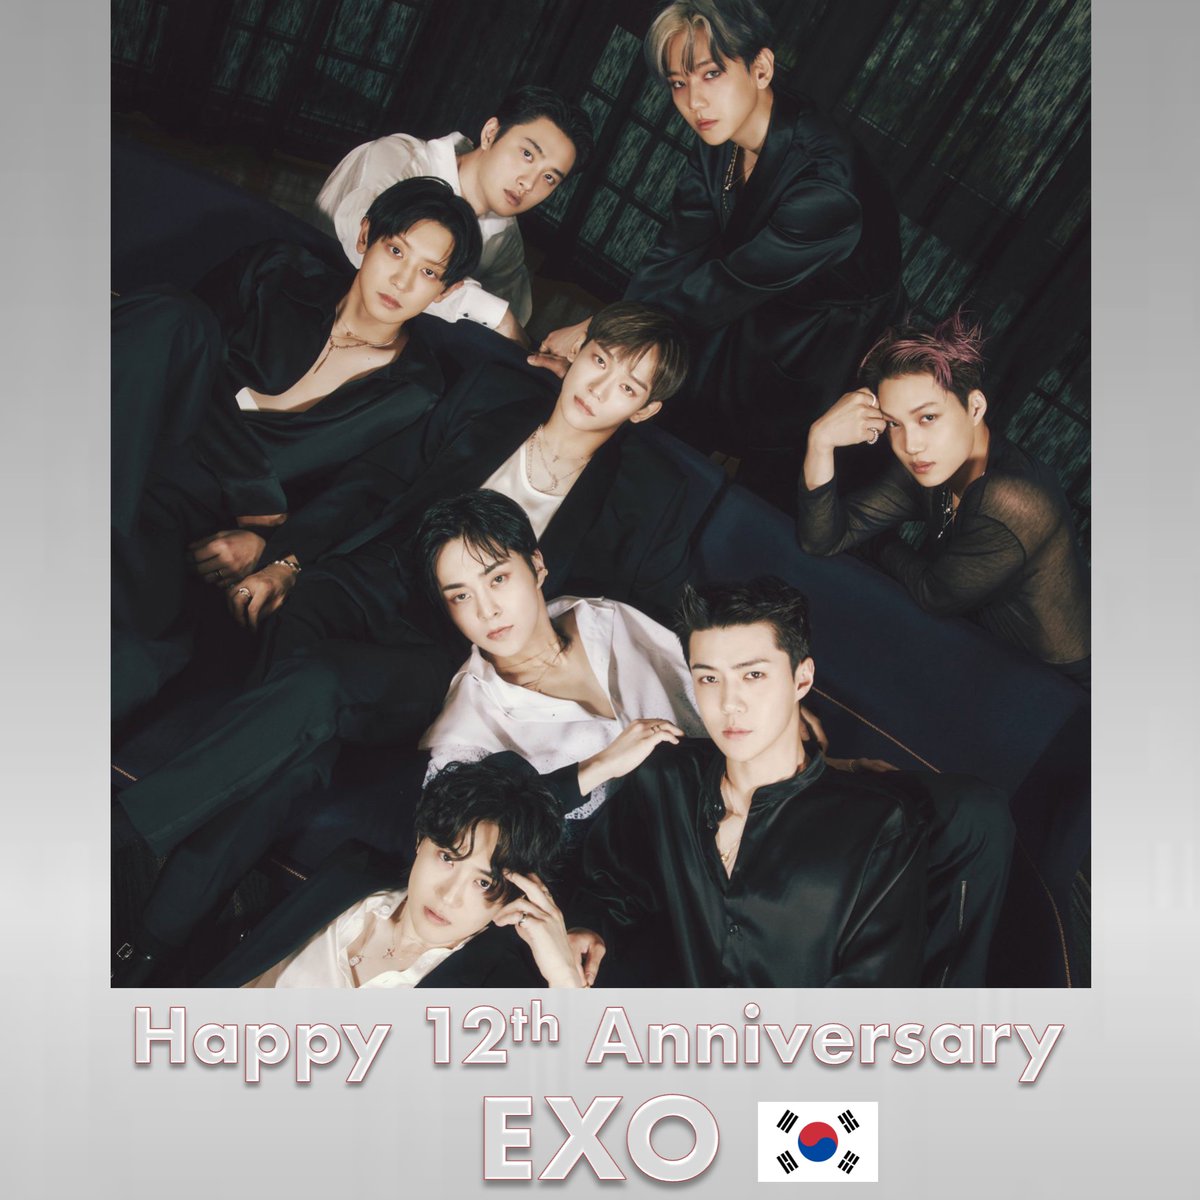 Happy 12th anniversary to the chart-topping, record-breaking, history-making, top-selling legendary Band #EXO, who paved the way for many! 👏🎂🎉🌟🐐👑👑👑👑👑👑👑👑👑💙 Exo were a huge success from day 1 with their first studio album XOXO (2013) selling over 1 million copies…